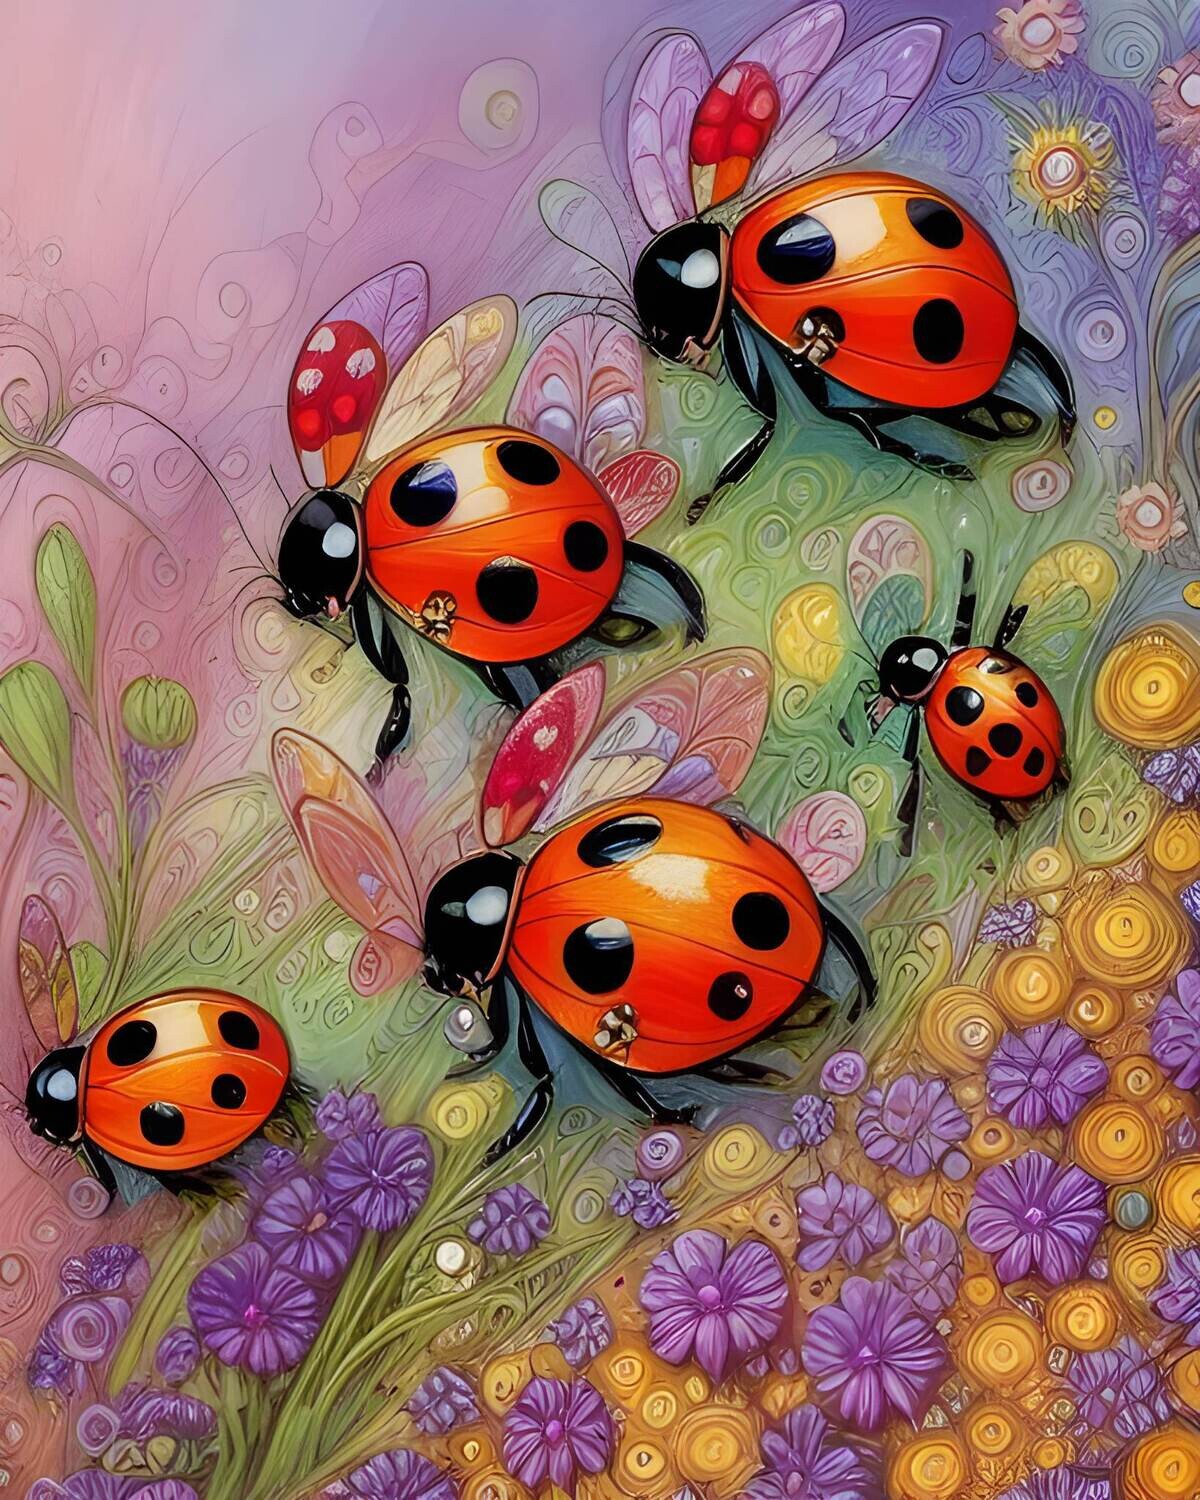 Lady Bugs 162 - Full Drill AB Kit,
Round - 40 x 50cm - Currently in stock